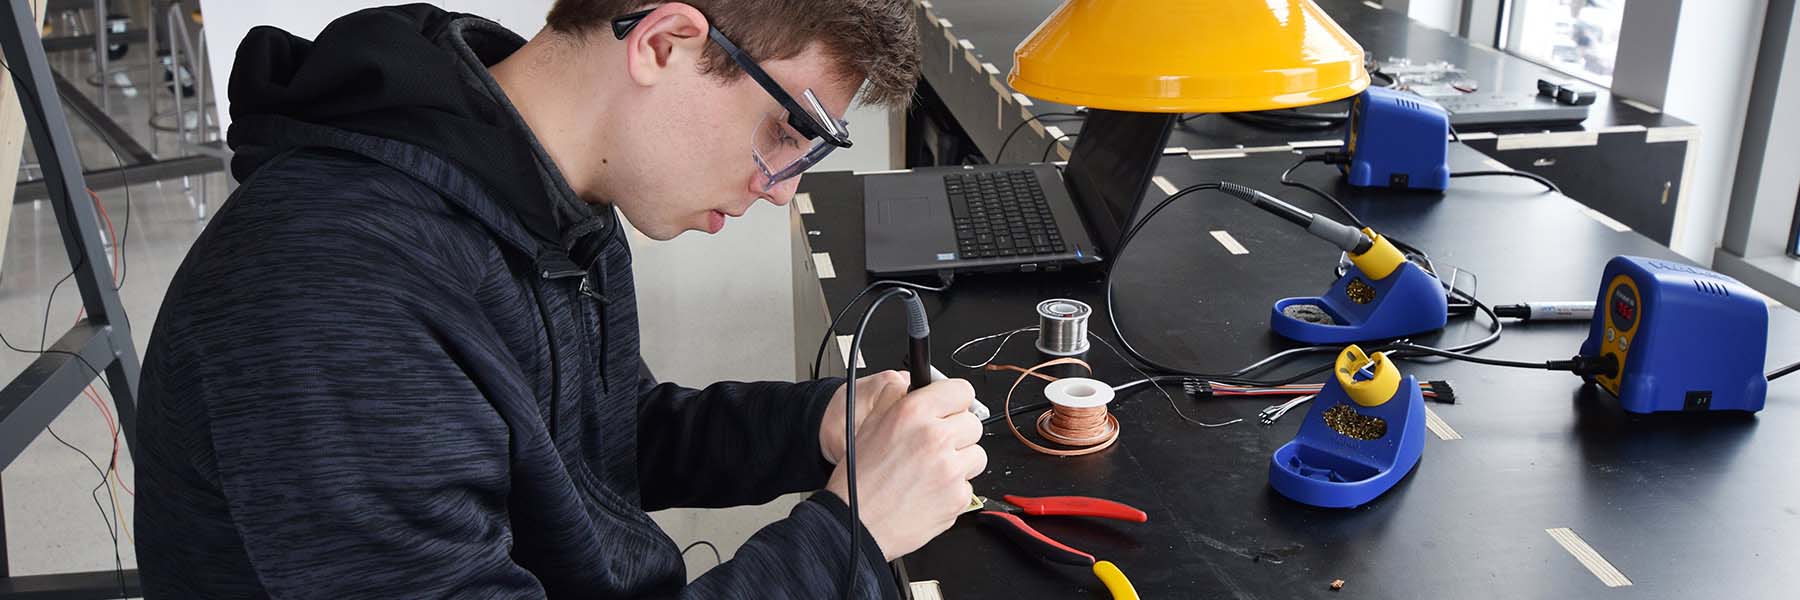 A student wearing goggles solders electronic hardware in a makerspace in Luddy Hall.